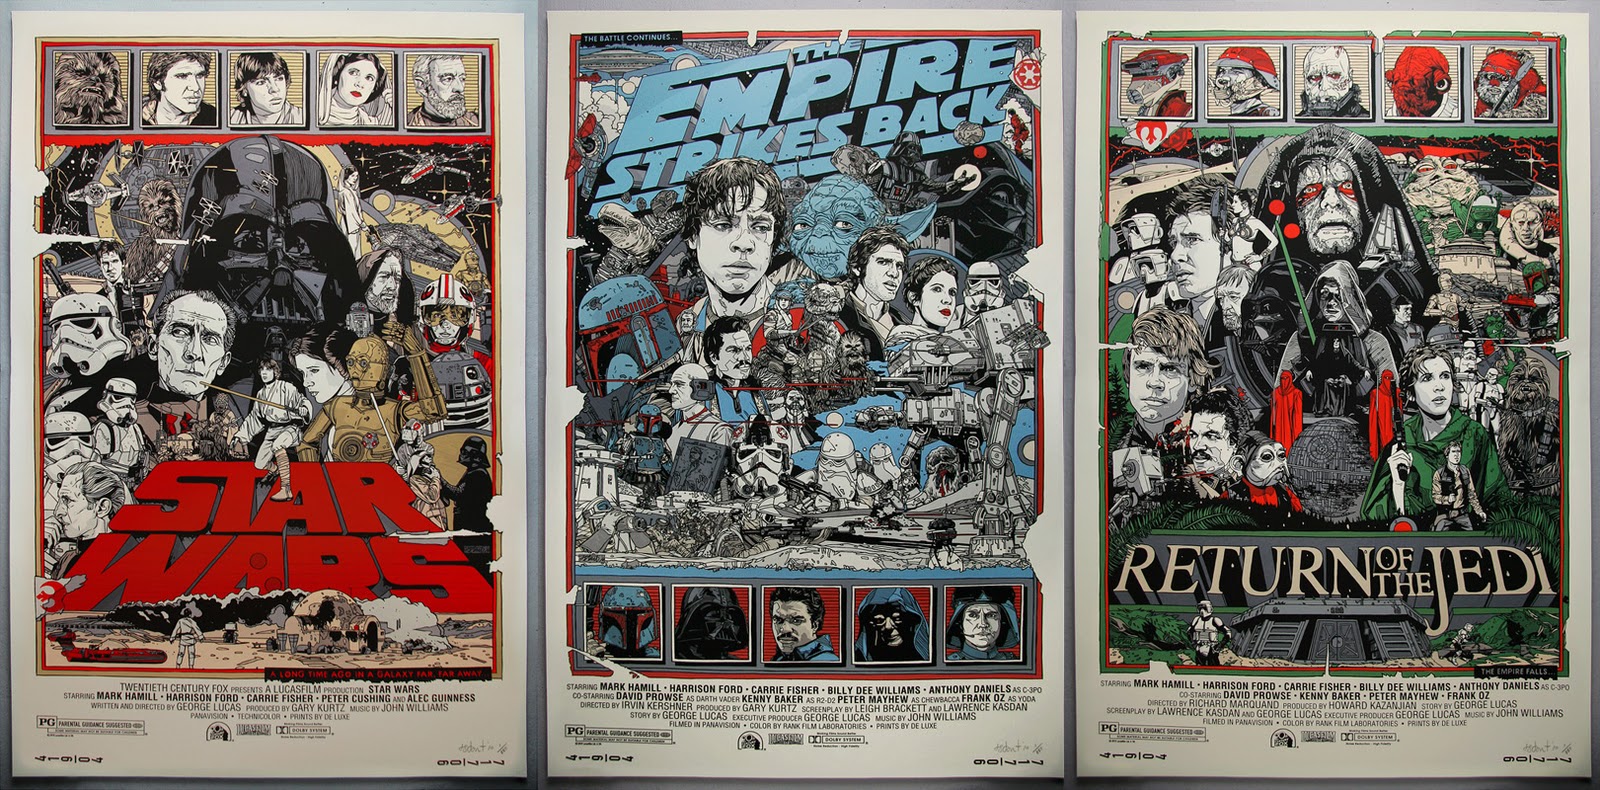 Fancy owning either of these fine lookin' sets of STAR WARS posters?